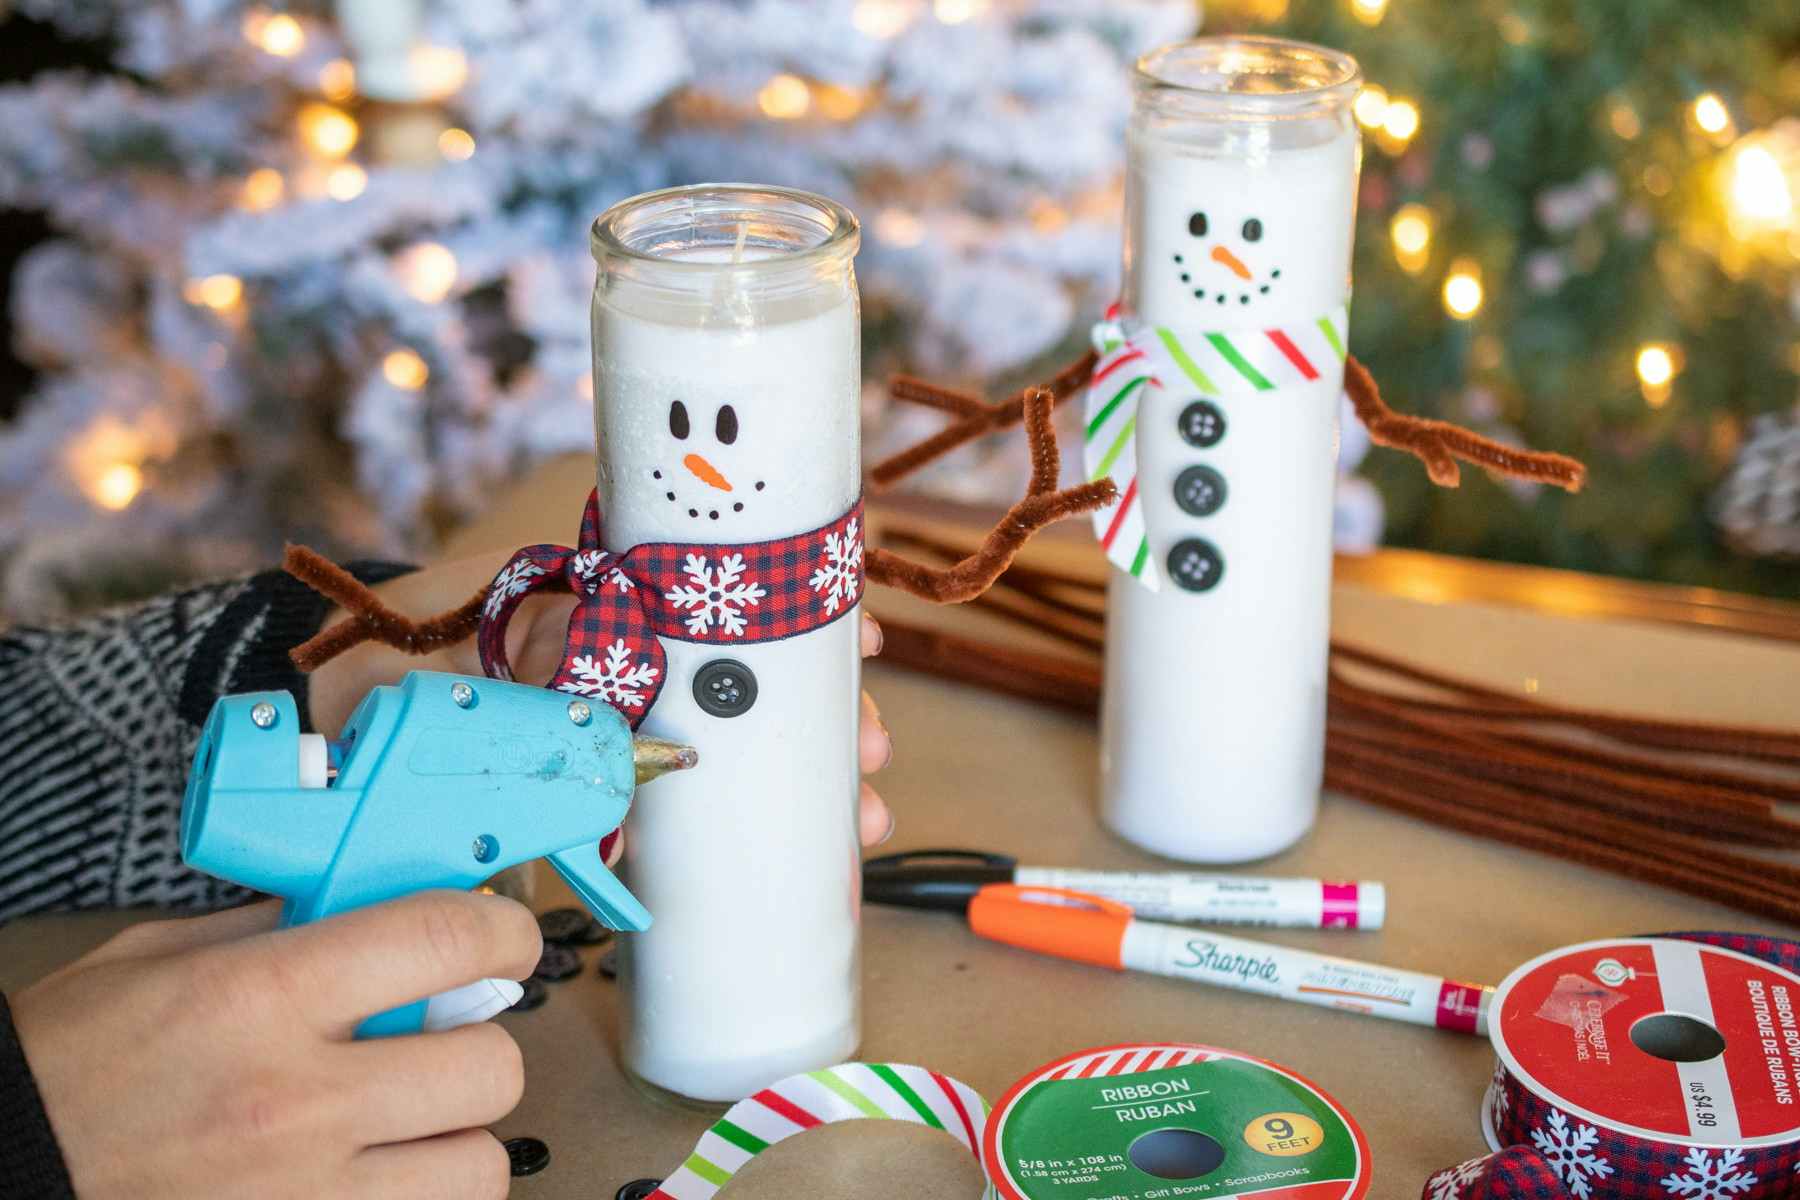 Festive DIY: How to Craft a Snowman Hat Centerpiece from Dollar